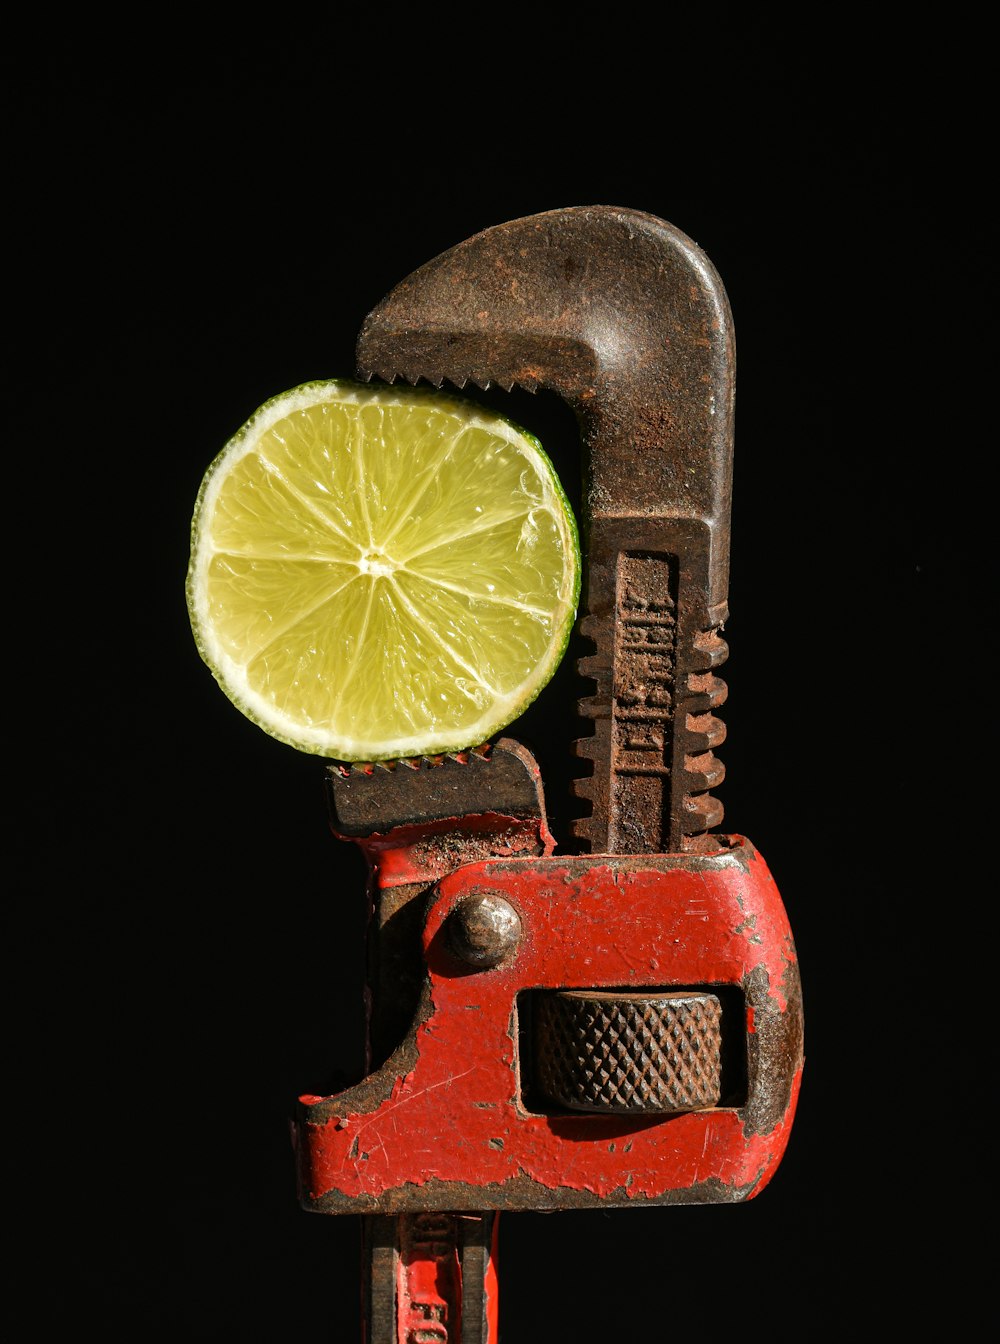 a lime slice is being held in a wrench